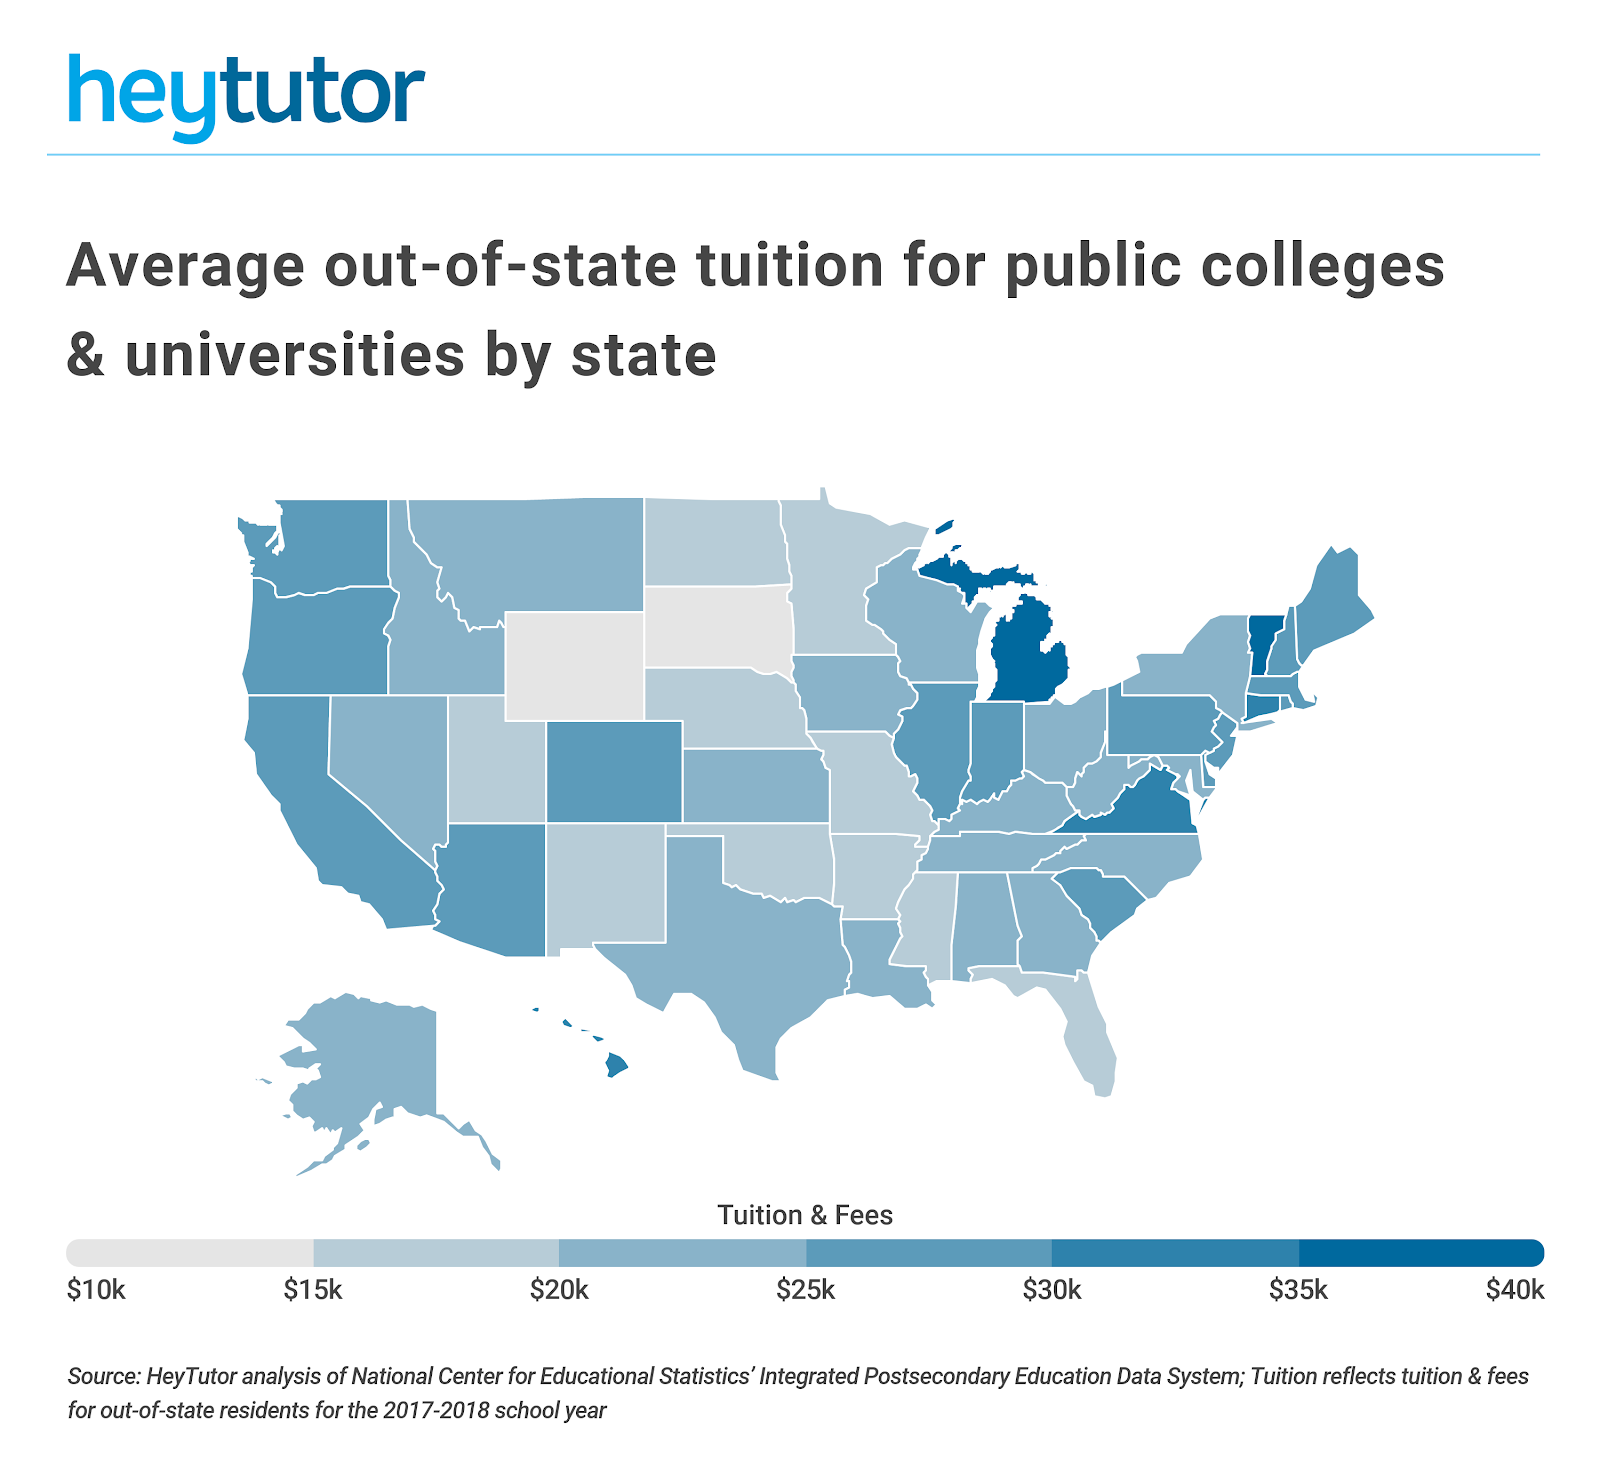 The Top 10 Most Expensive College States